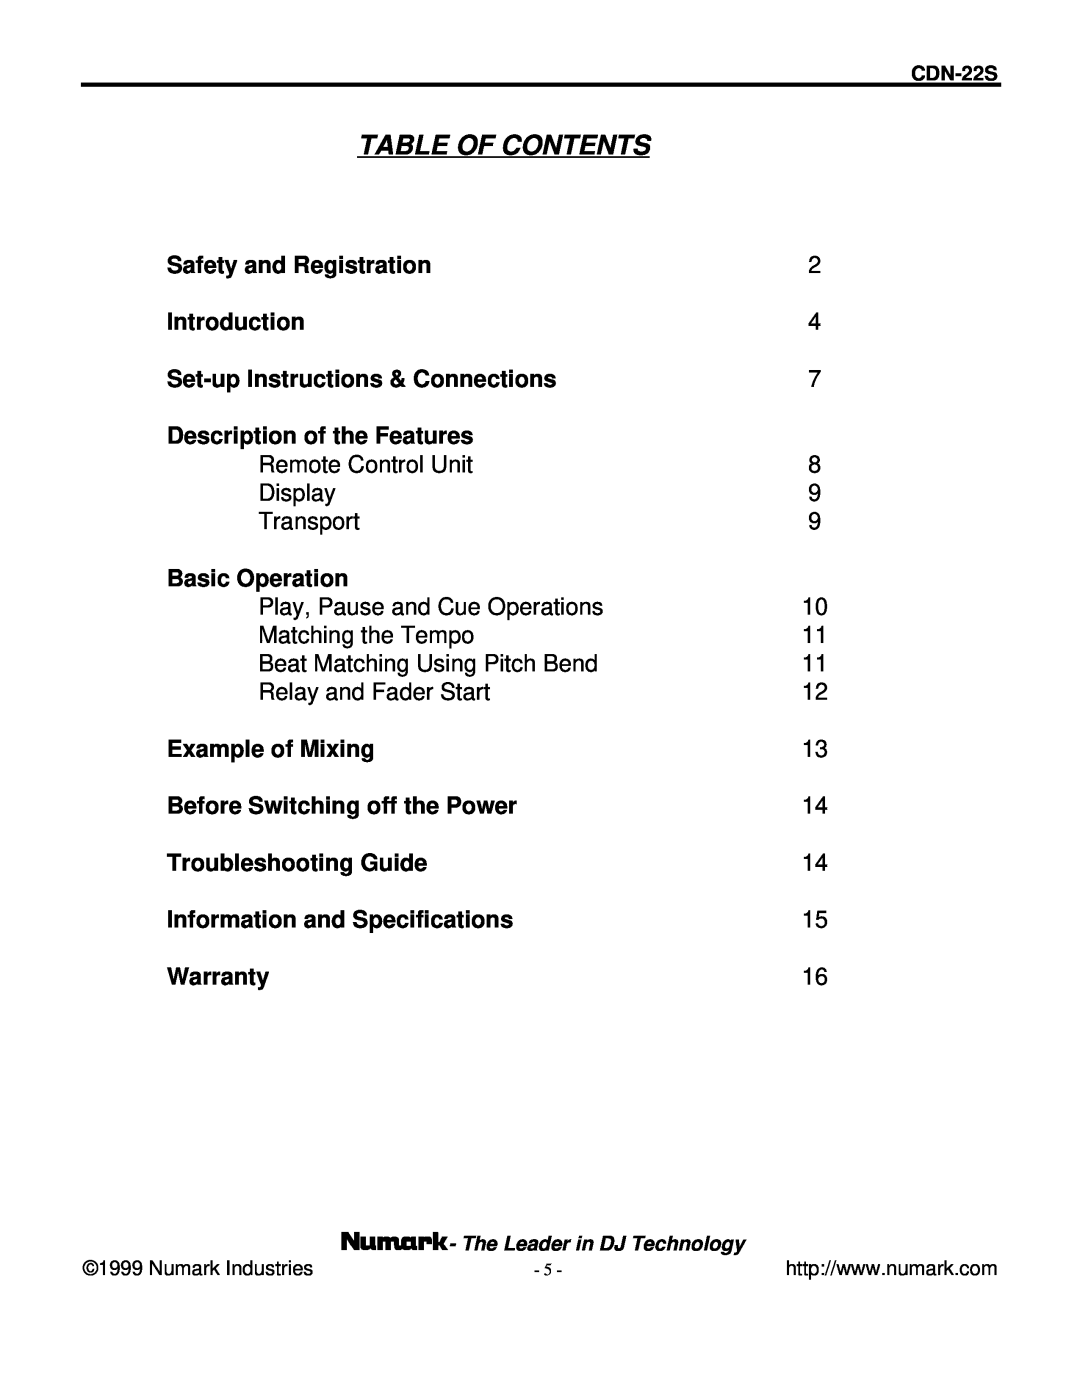 Numark Industries CDN-22S manual Table Of Contents 